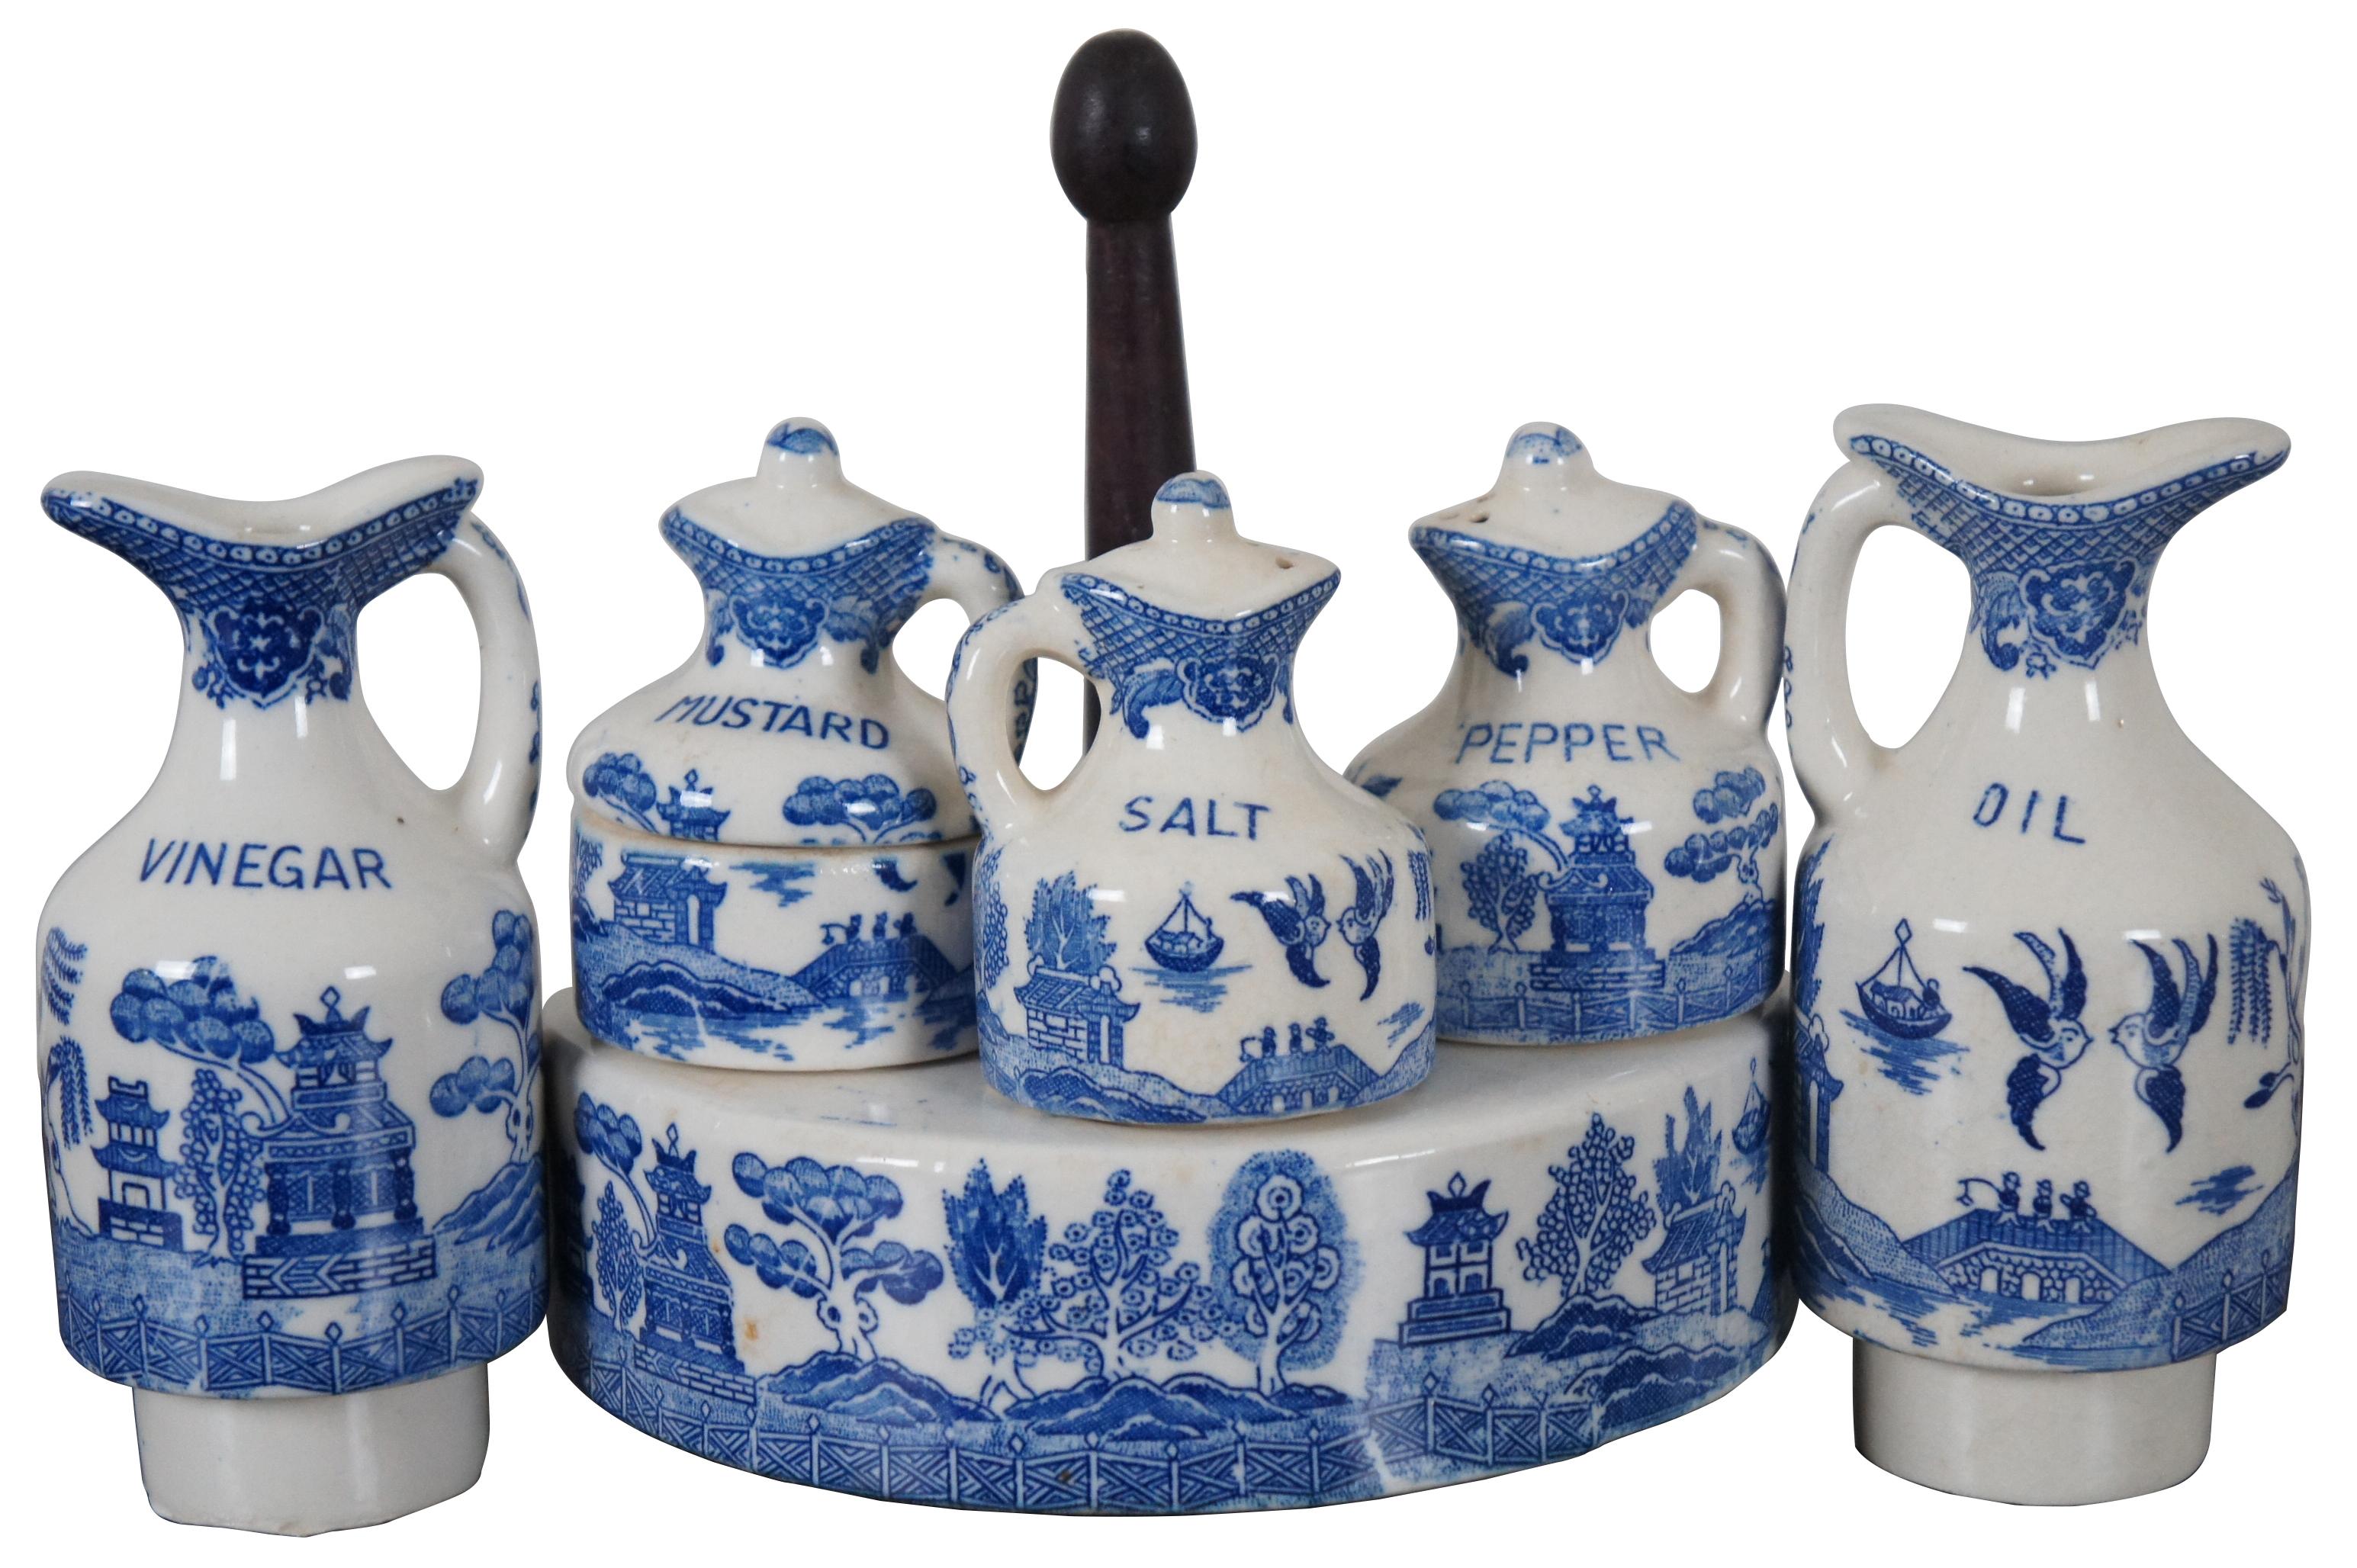 Antique blue willow pattern porcelain cruet or condiment set featuring a circular lazy Susan base on a wood dolly, labeled salt and pepper shakers, oil and vinegar bottles, and mustard pot.

Measures: Jugs - 2.25” x 5” / Shakers - 2” x 3.75”